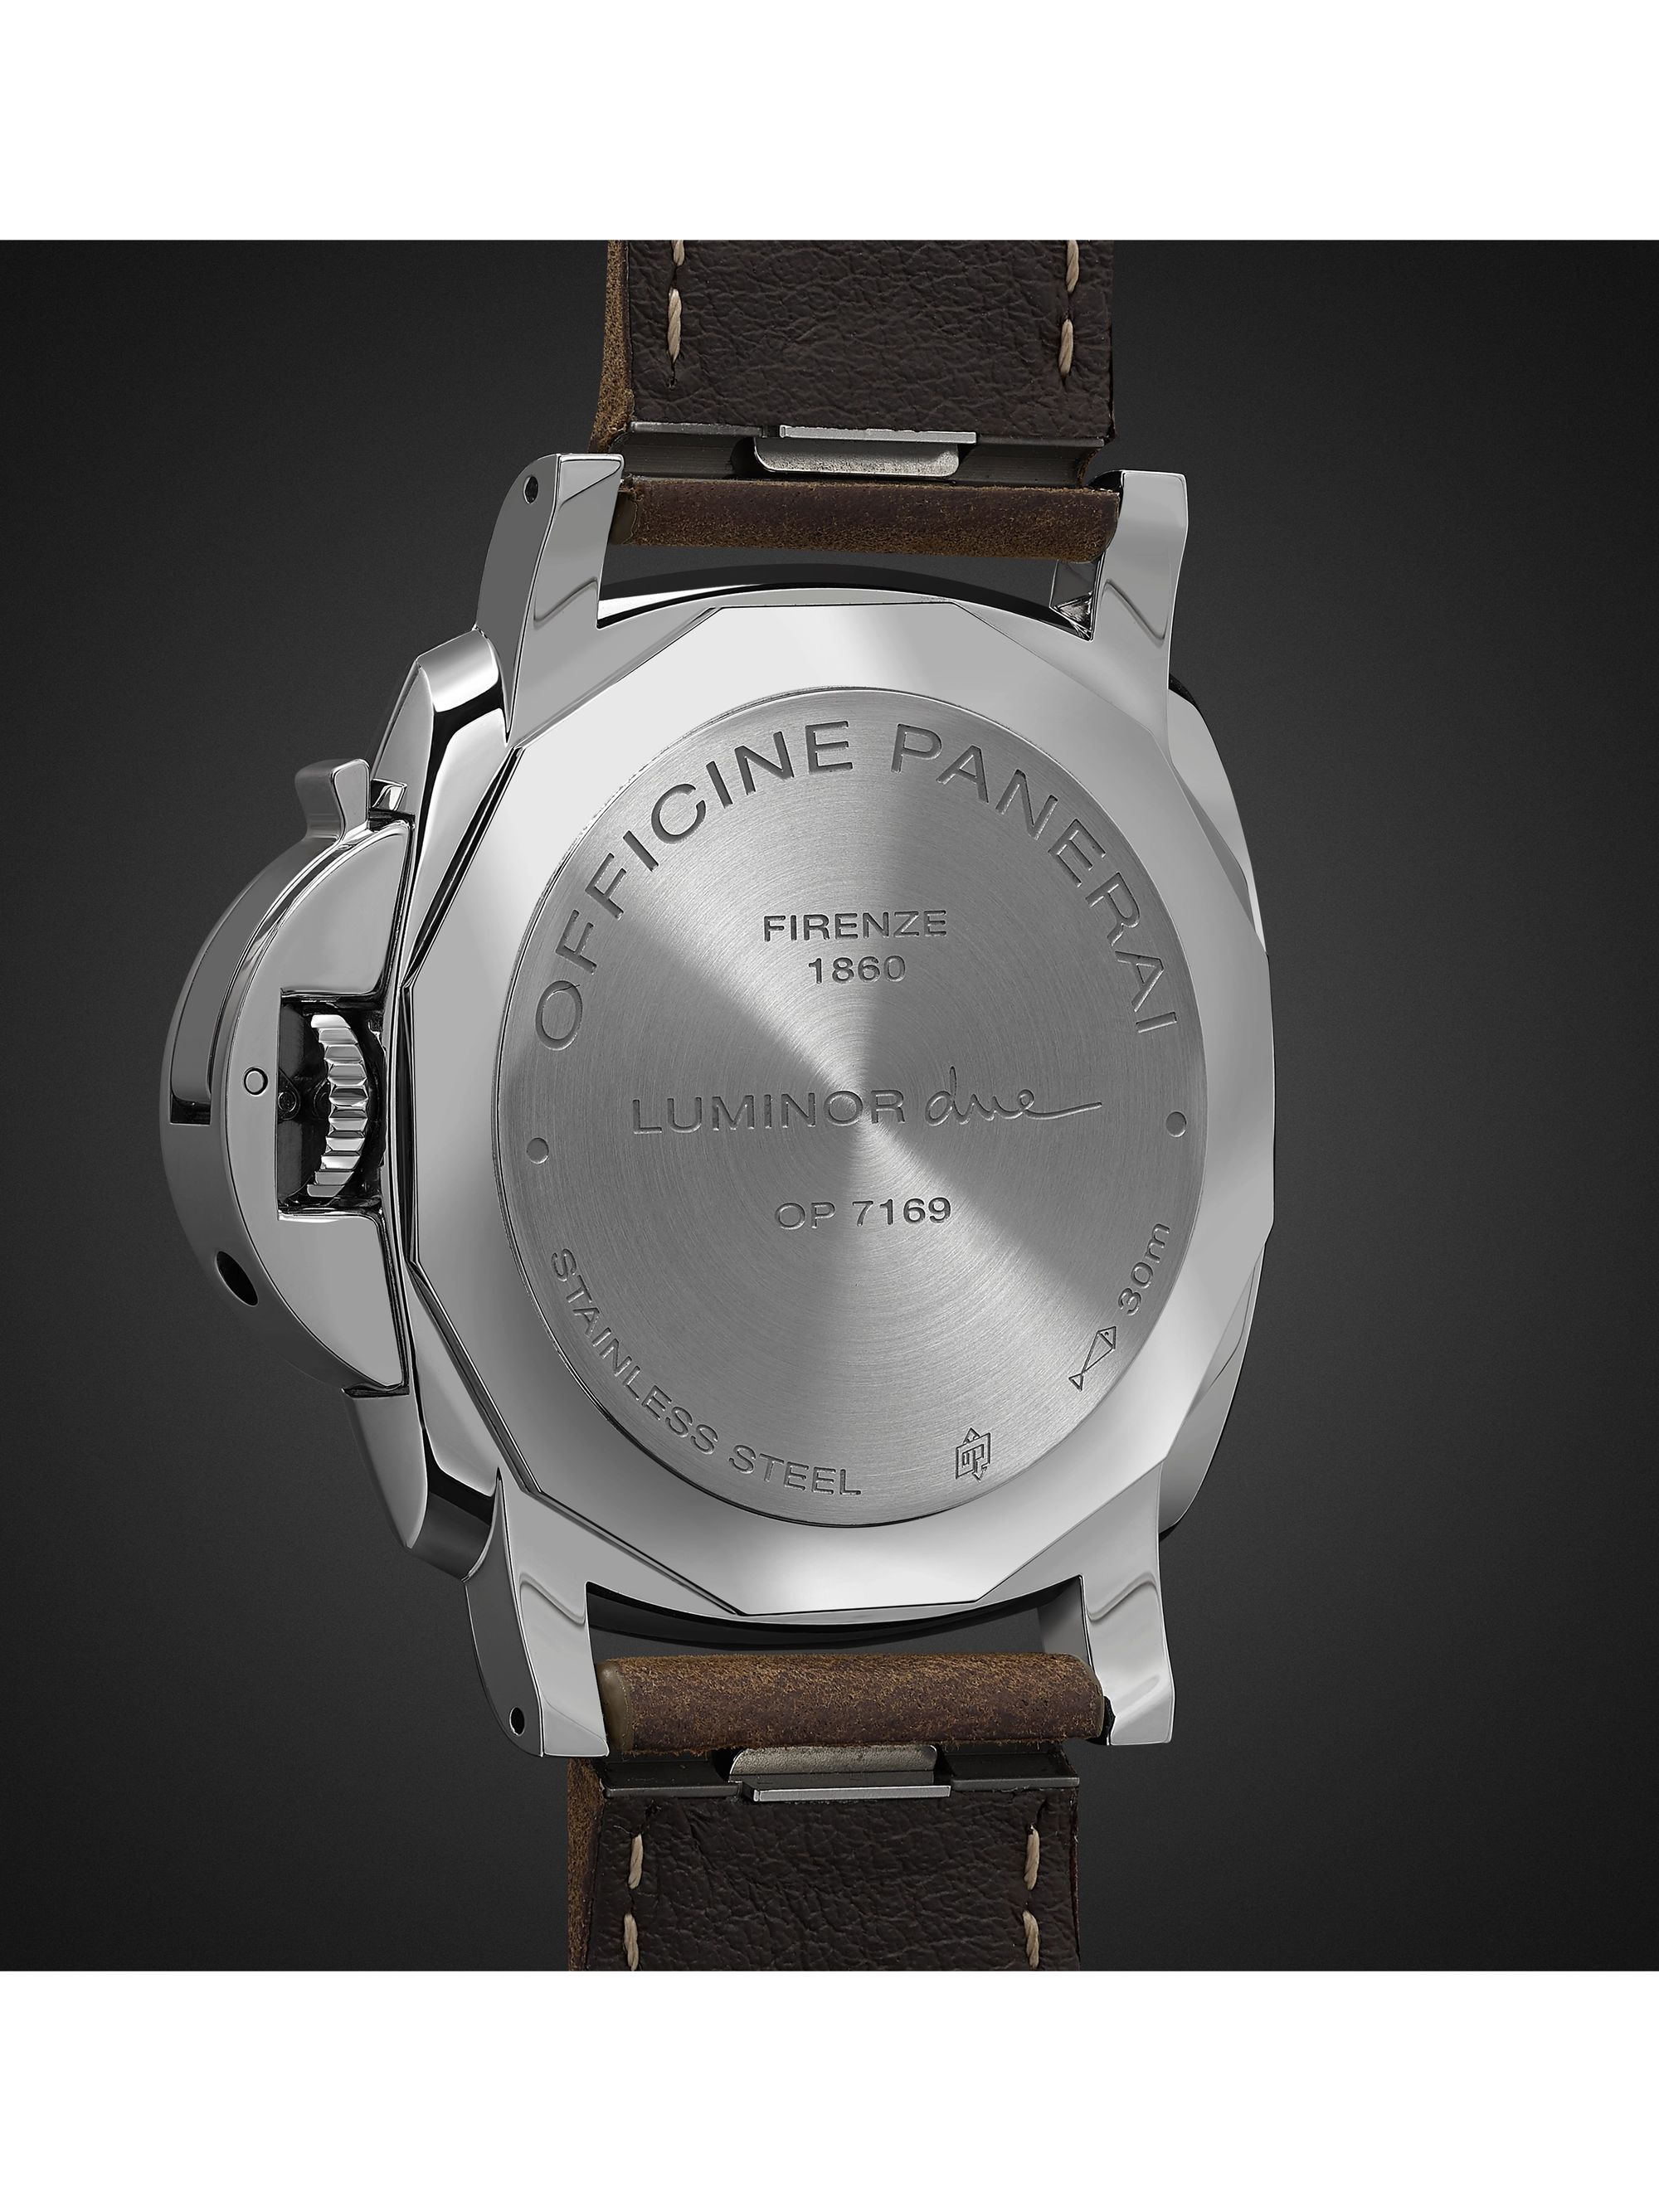 PANERAI Luminor Due Automatic 42mm Stainless Steel and Leather Watch, Ref. No. PAM00904